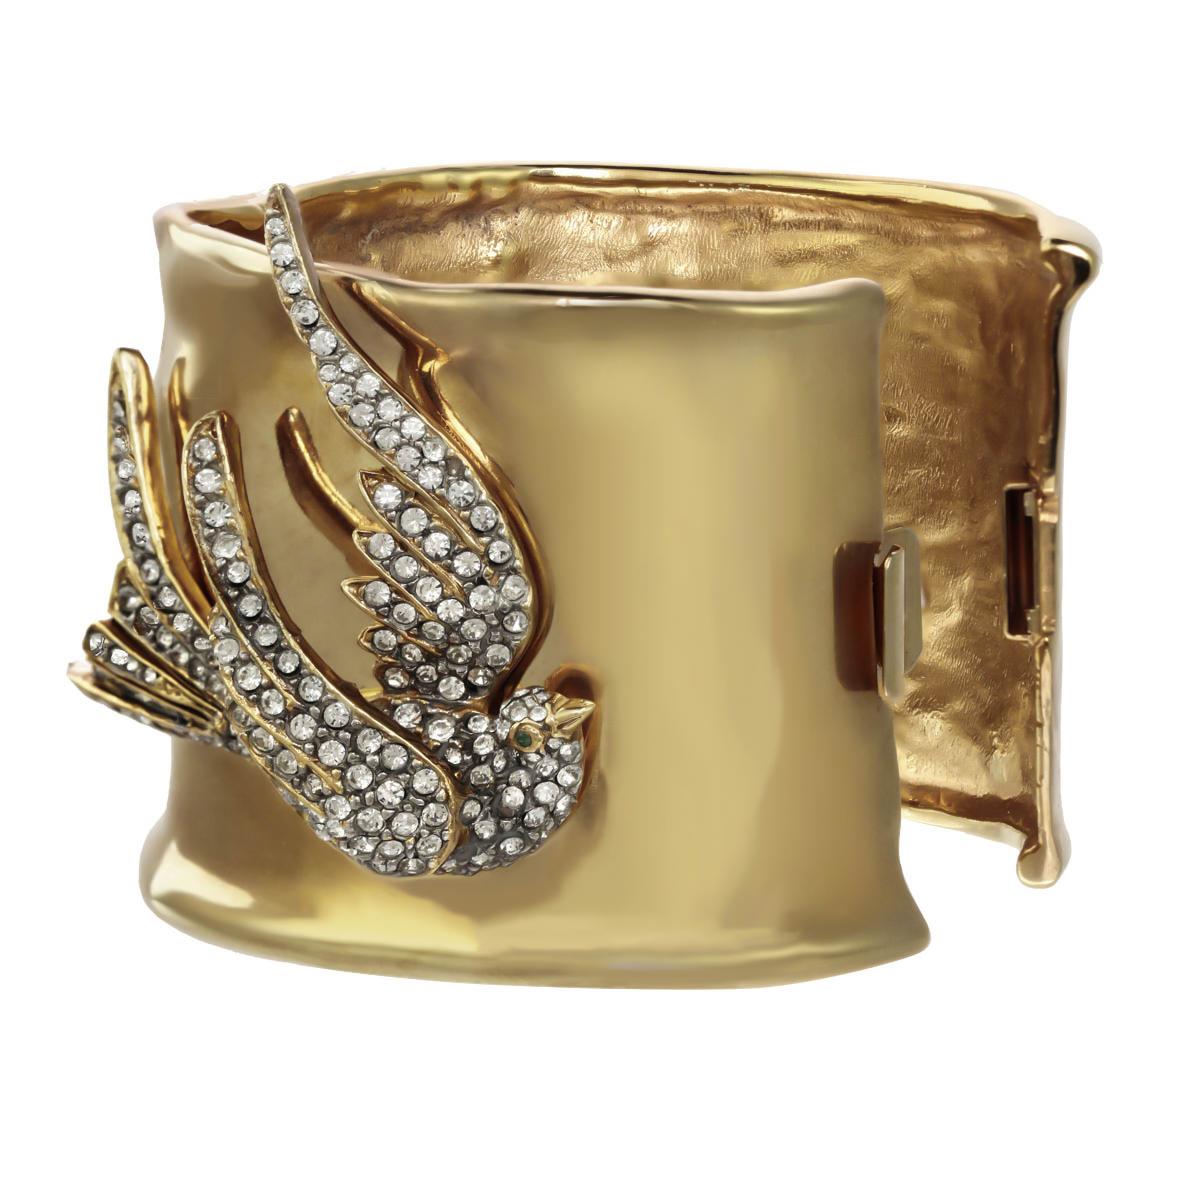 An organic gold cuff meets a forever-graceful Swarovski  rhinestone encrusted dove on this gorgeous piece. From Carolyne's collaboration with heritage jewelry design house, CINER, the marriage of these two pieces, and designers, could not be more